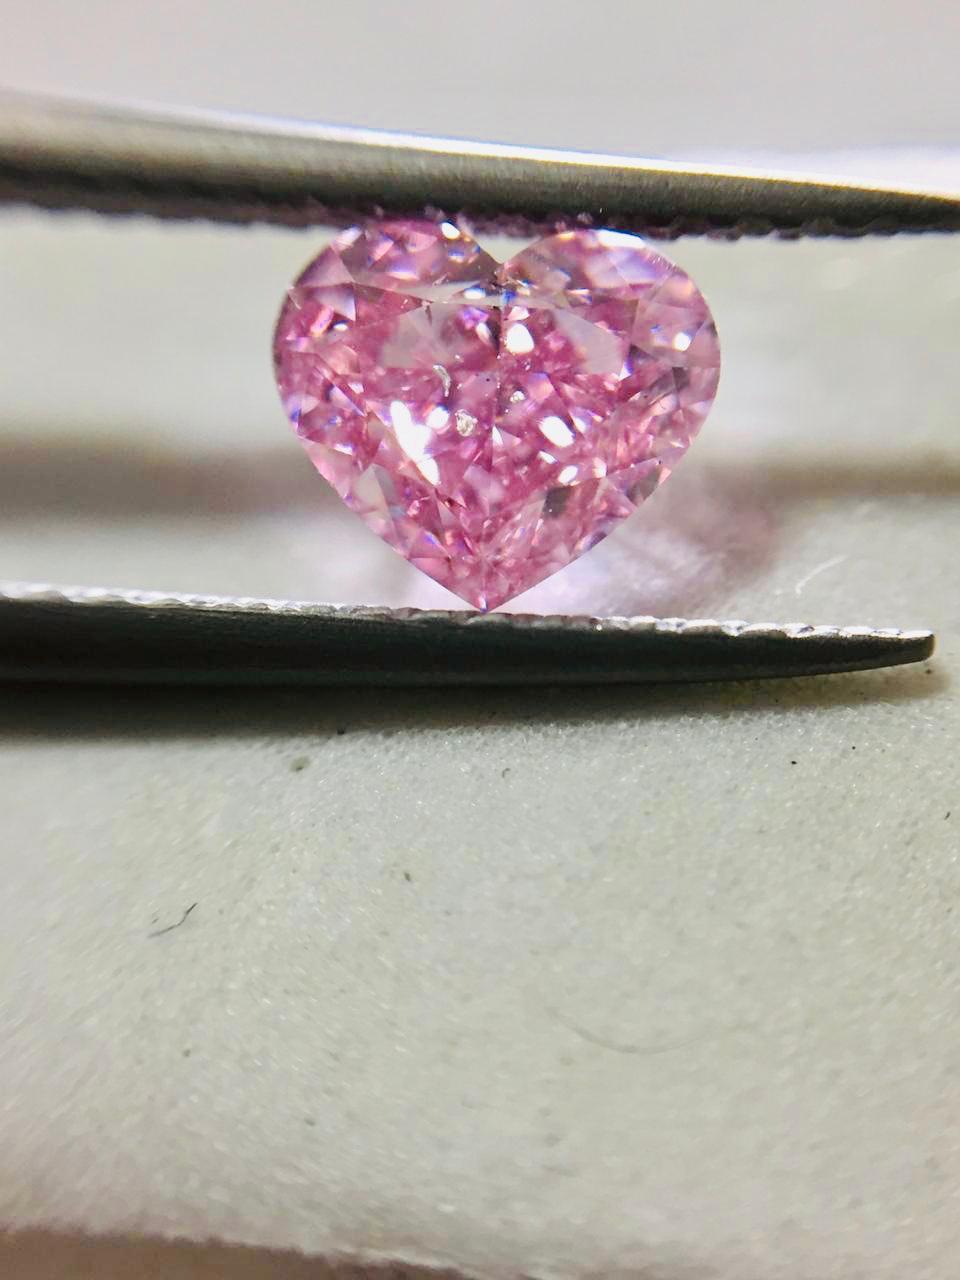 From the Emilio Jewelry Museum Vault, Showcasing a magnificent investment grade 1.00 carat certified Vivid Purplish Pink heart shaped diamond. What makes this diamond even more special, is the very sweet bubble gum vivid color the purplish overtone